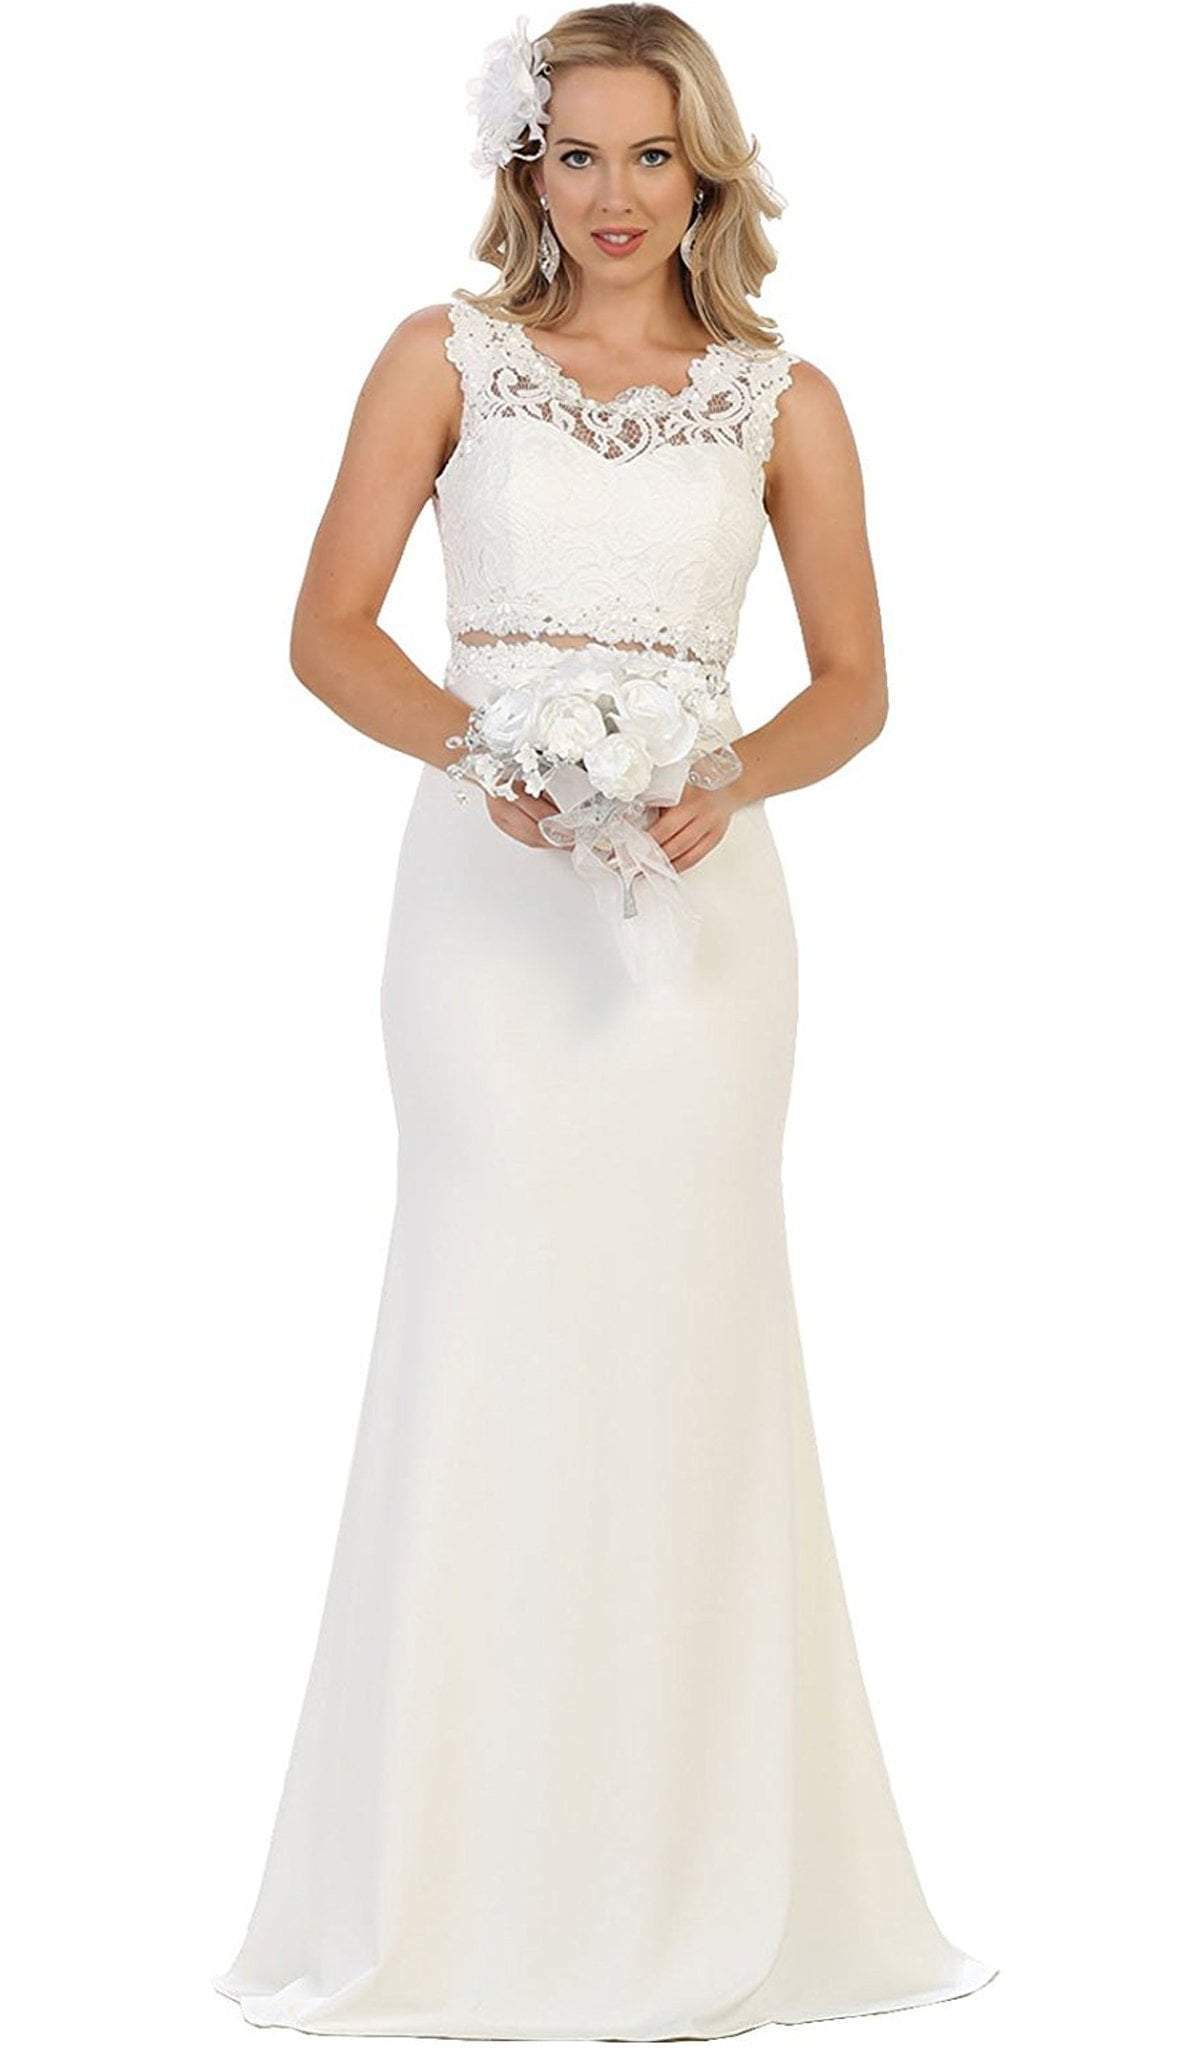 May Queen - Lace Bodice Illusion Paneled Sheath Evening Gown Special Occasion Dress 4 / Ivory